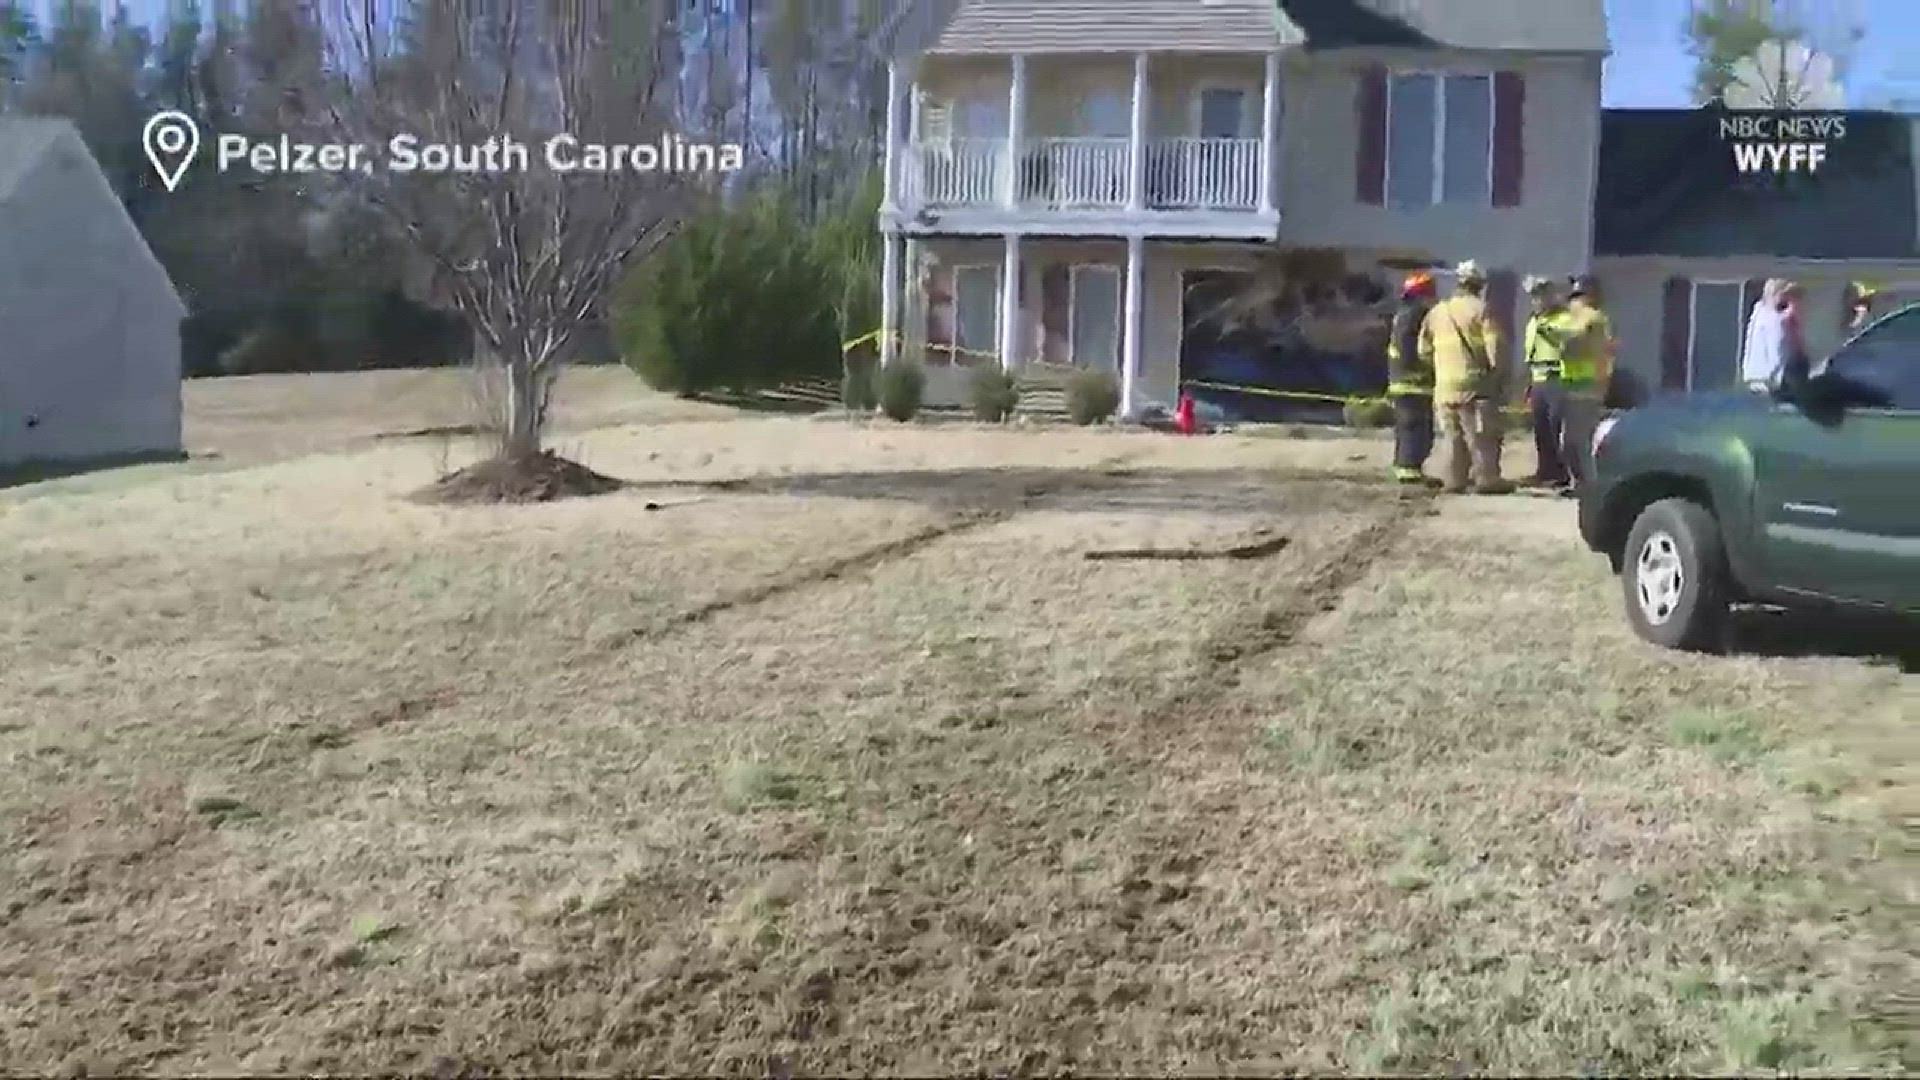 A South Carolina DUI suspect led police on a high-speed chase that ended when his car skidded across a yard and into a family's living room.